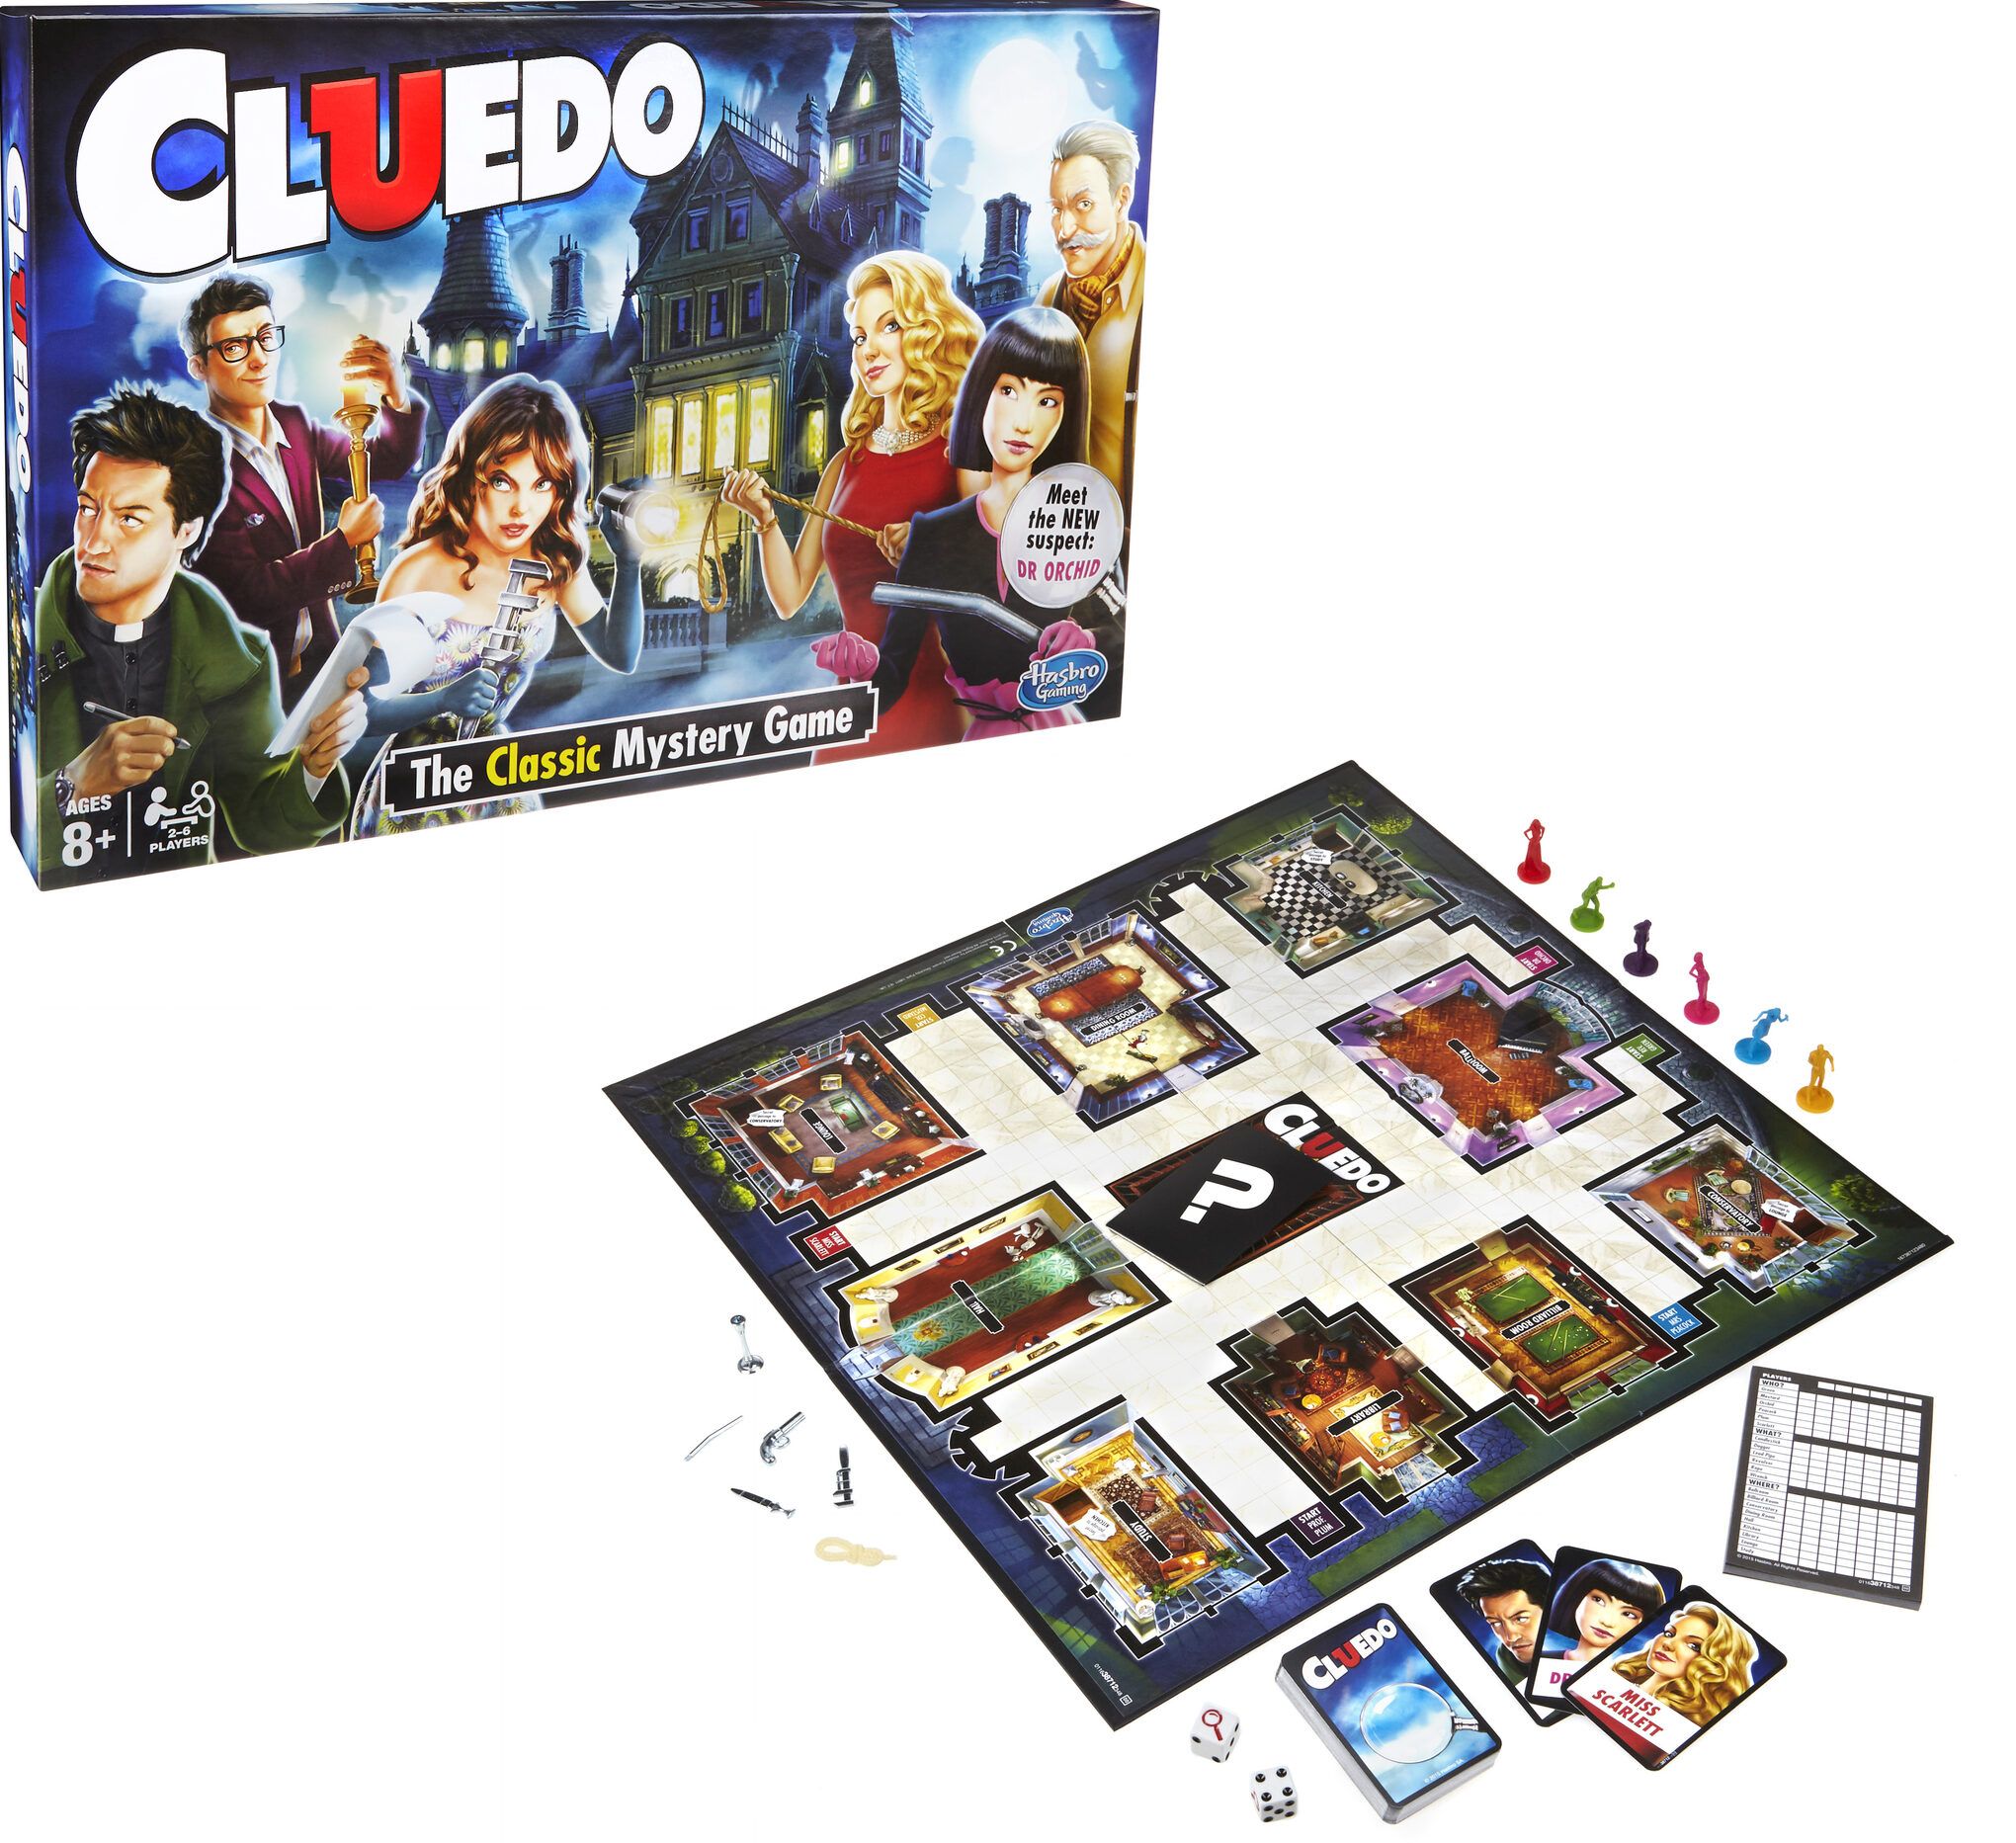 Cluedo mystery game - Hasbro board game - Shop hasbro games at The Toy Room